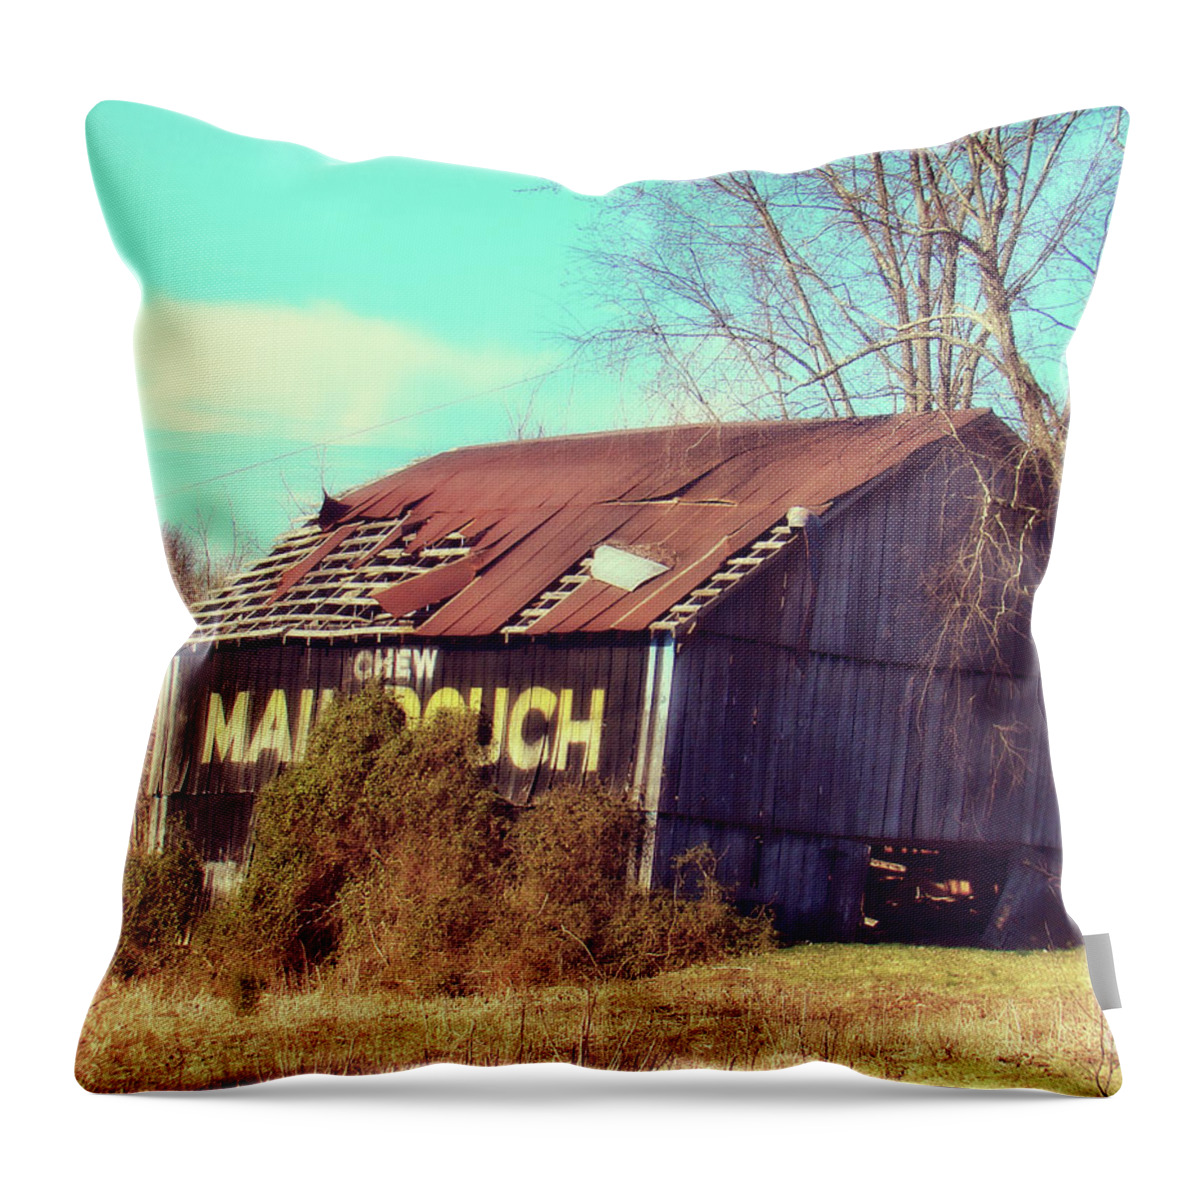 Southern Throw Pillow featuring the photograph Chew Mail Pouch by Lenore Locken